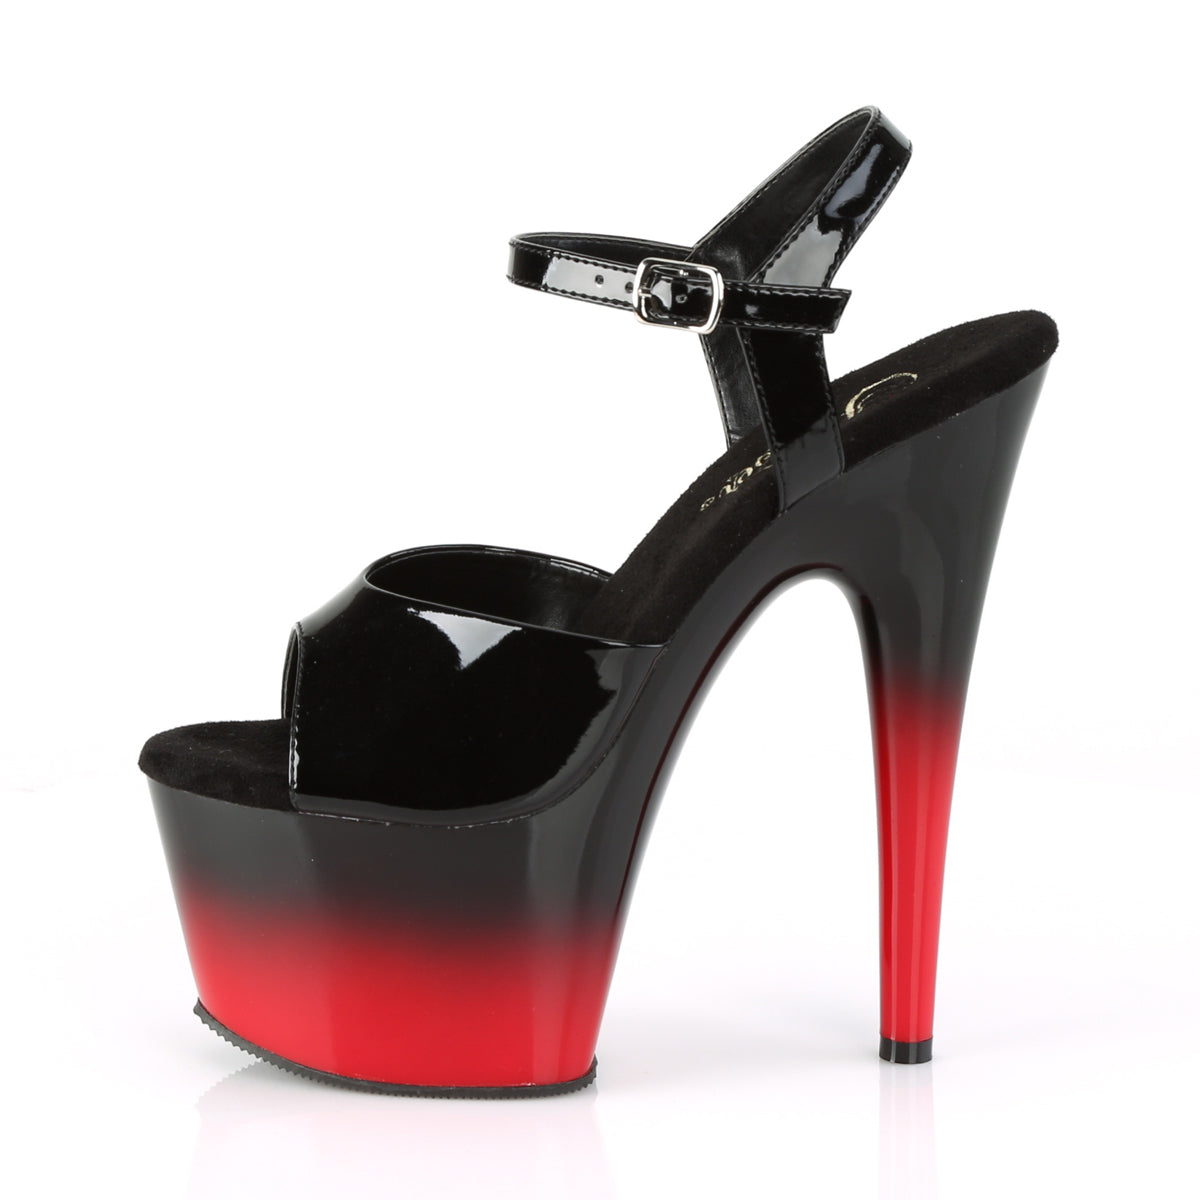 ADORE-709BR-H/B/B-R 7" PLEASER FAST DELIVERY 24-48h